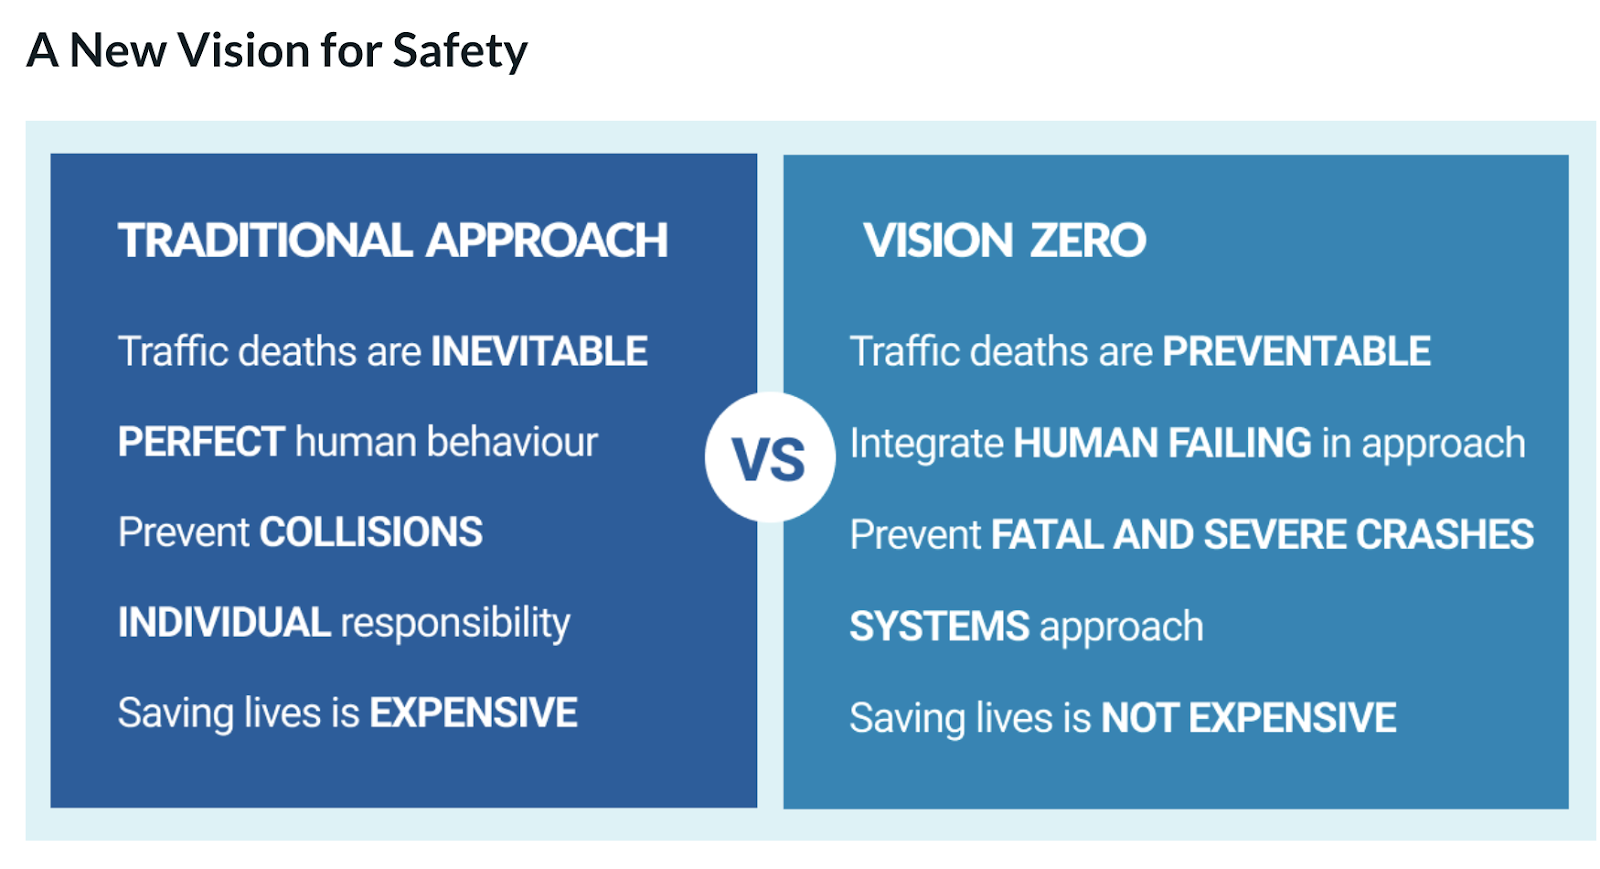 A look at how Vision Zero compares to traditional approaches for the roadways